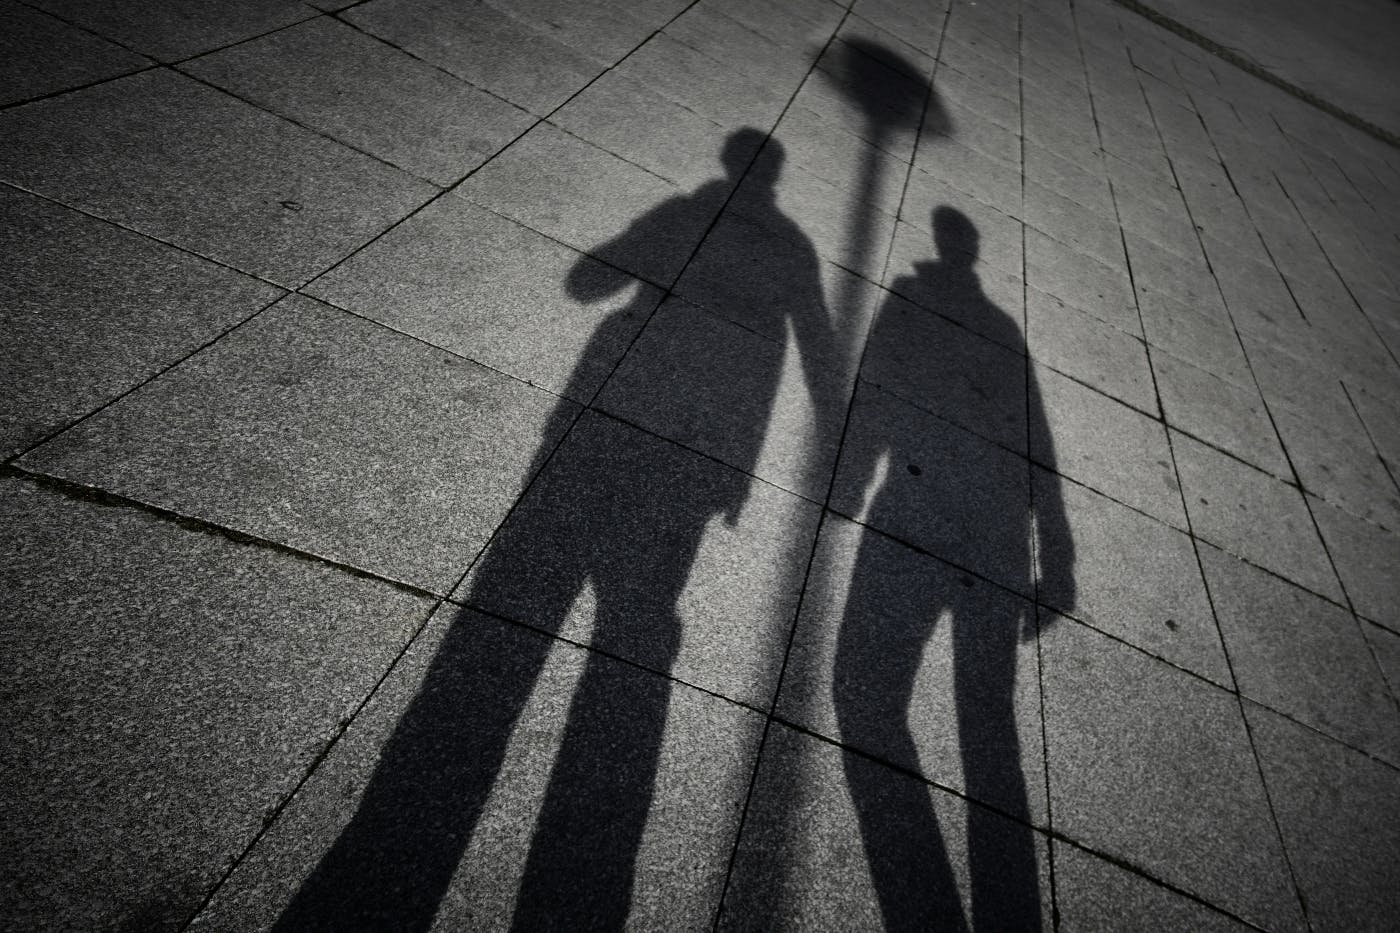 the shadows of two people holding hands